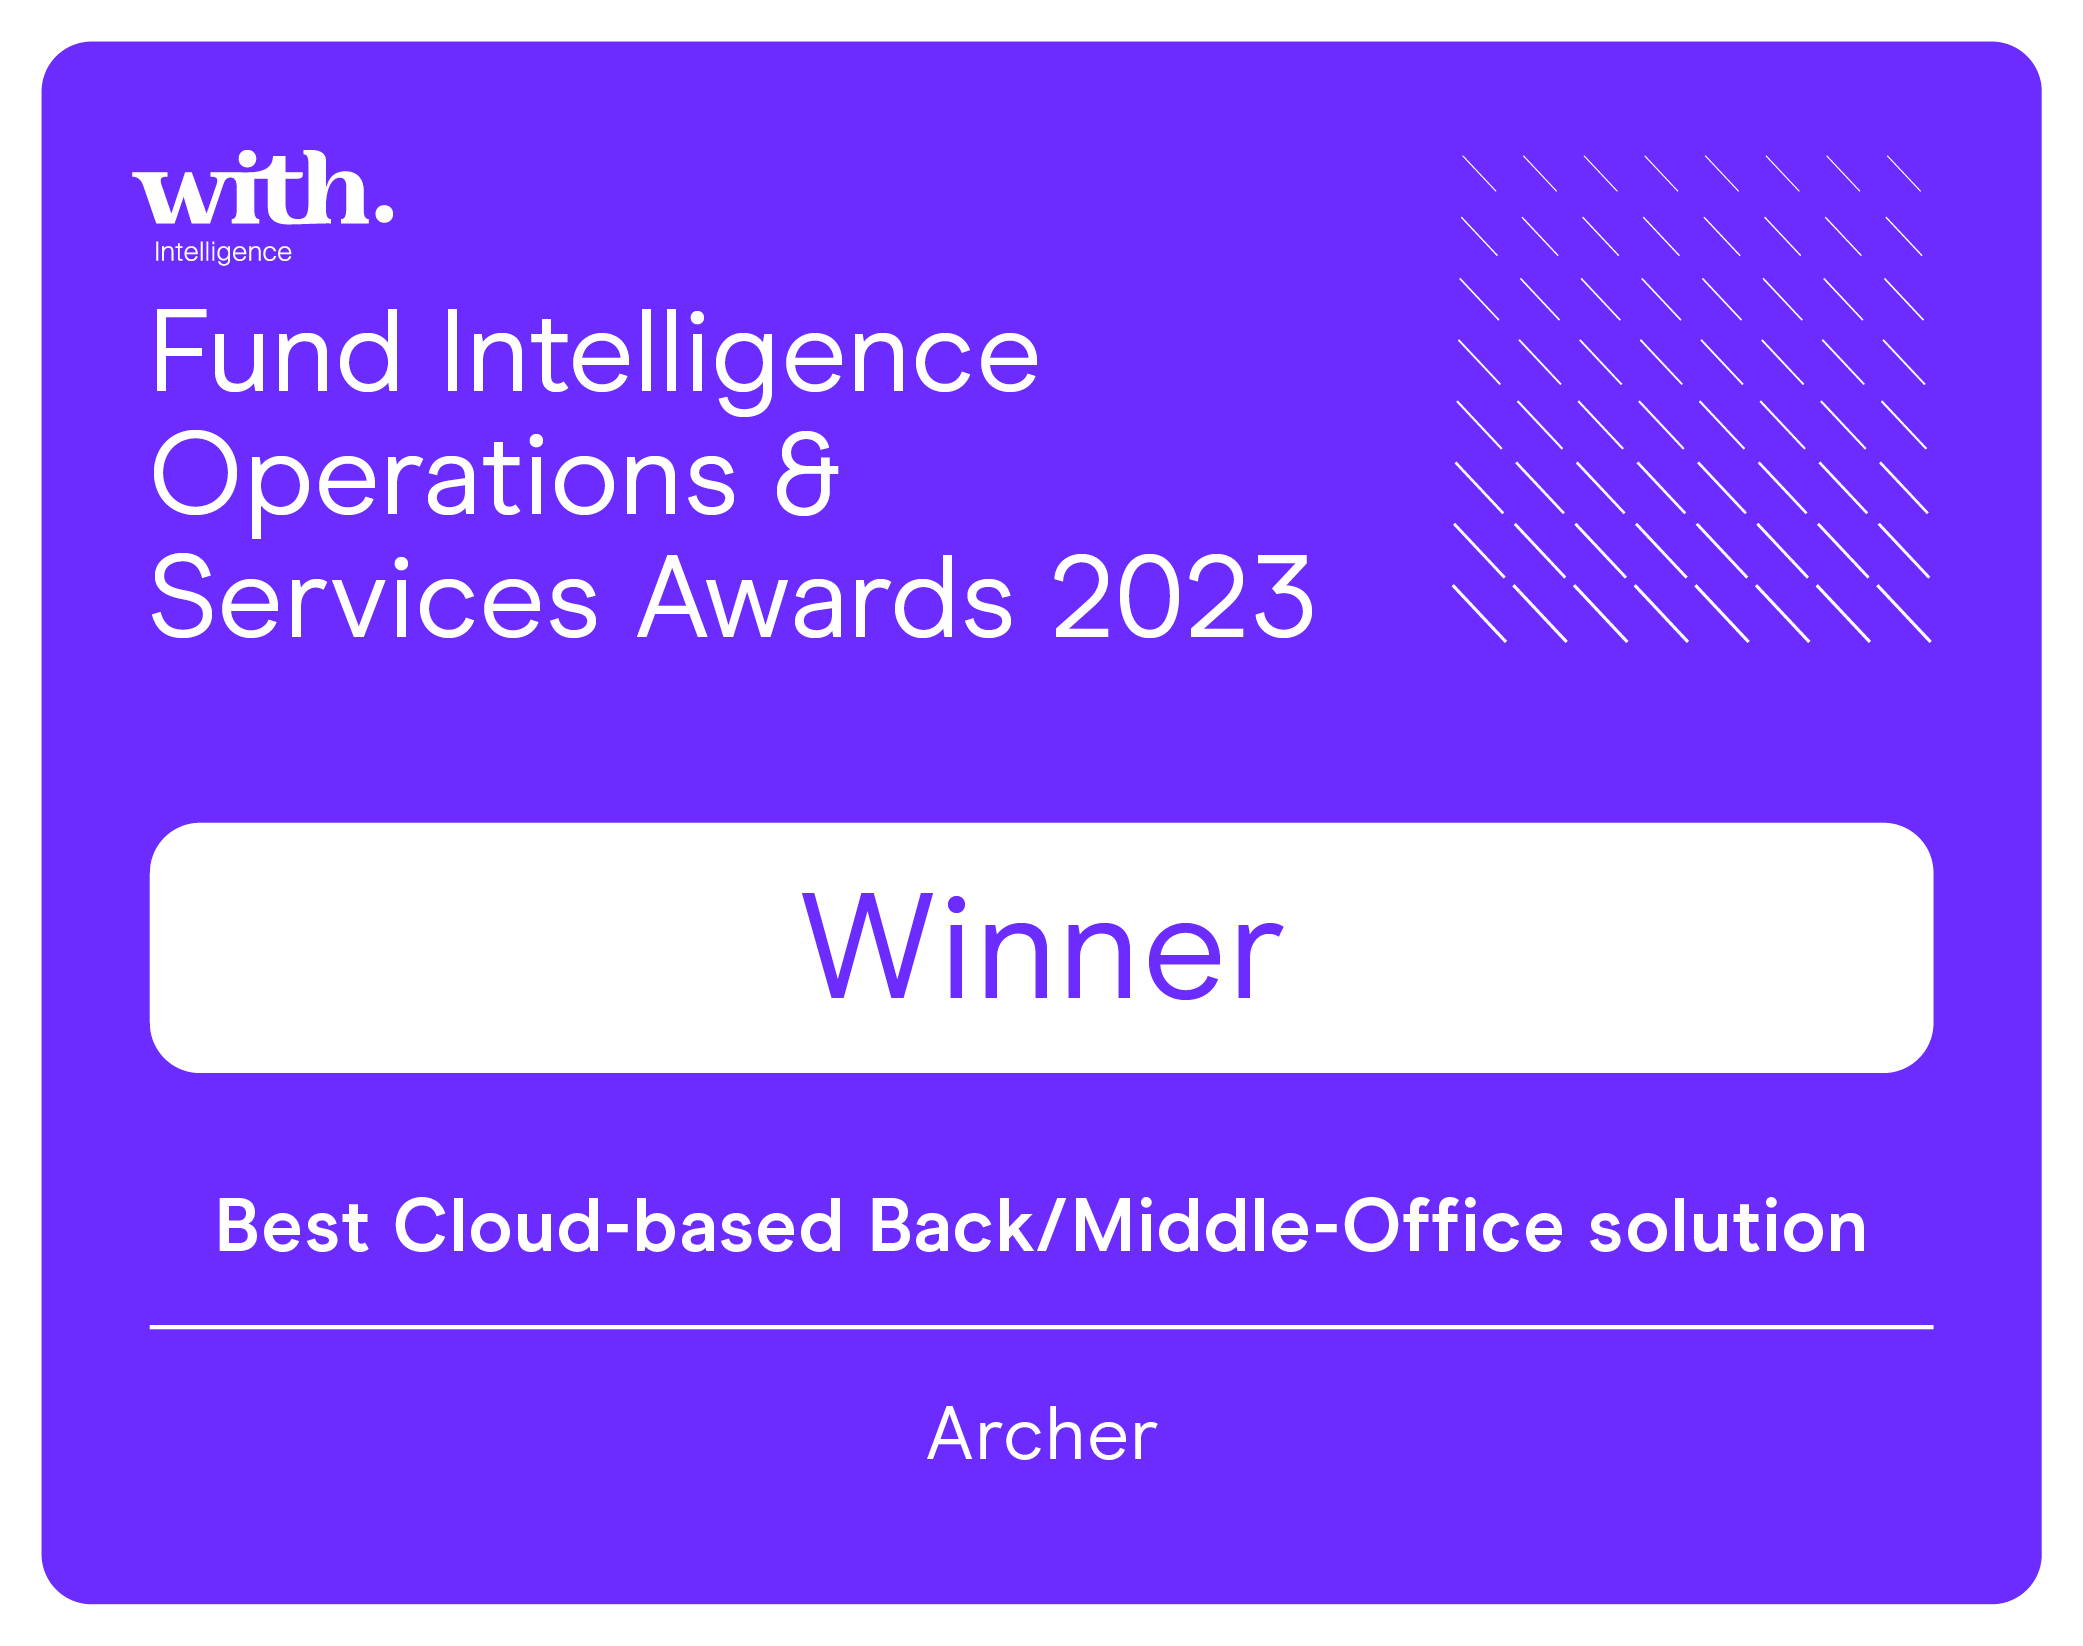 Archer was named Best Cloud-Based Back/Middle-Office Solution in the 2023 Fund Intelligence Operations & Services Awards.  